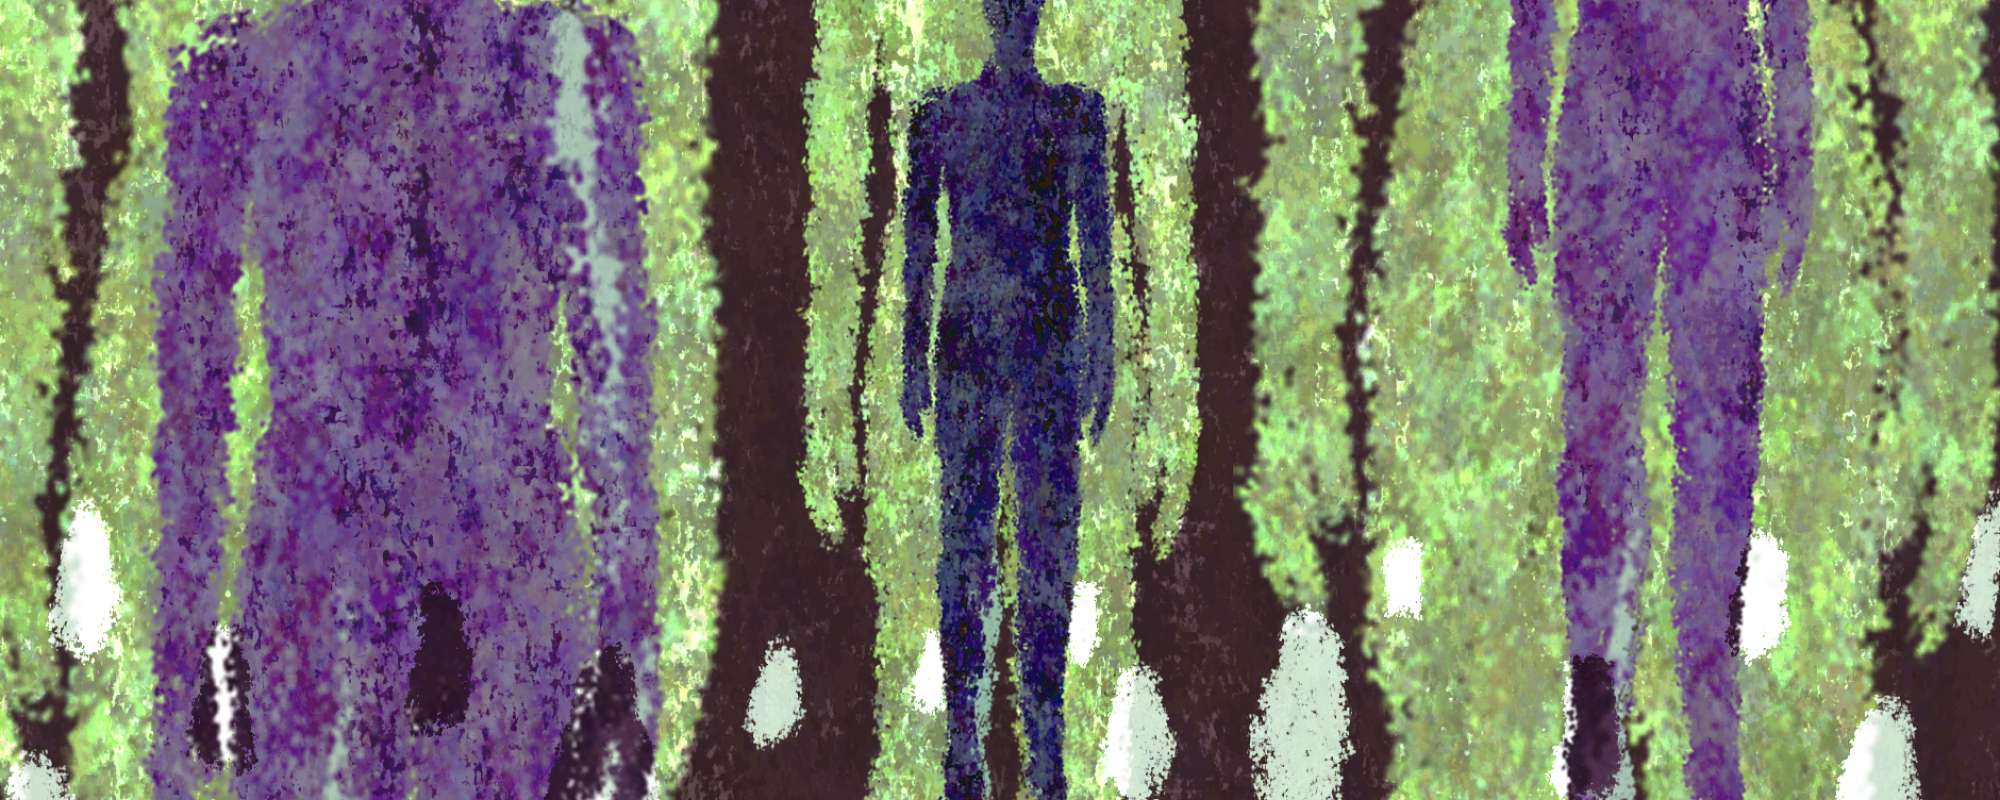 silhouettes of people in green and purple against black background